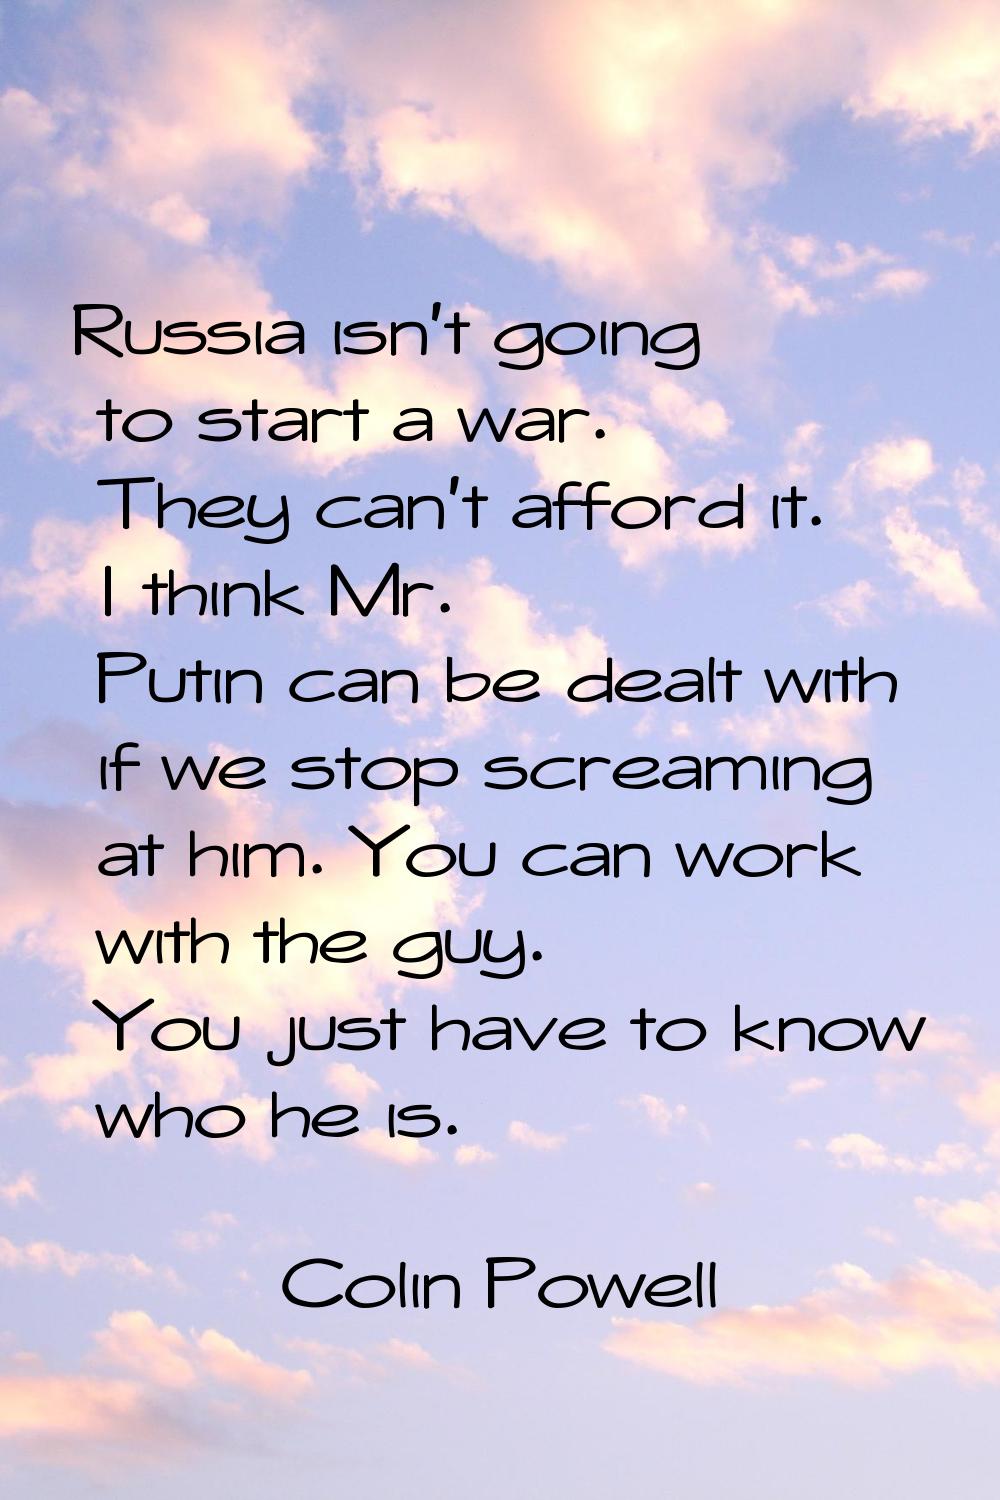 Russia isn't going to start a war. They can't afford it. I think Mr. Putin can be dealt with if we 